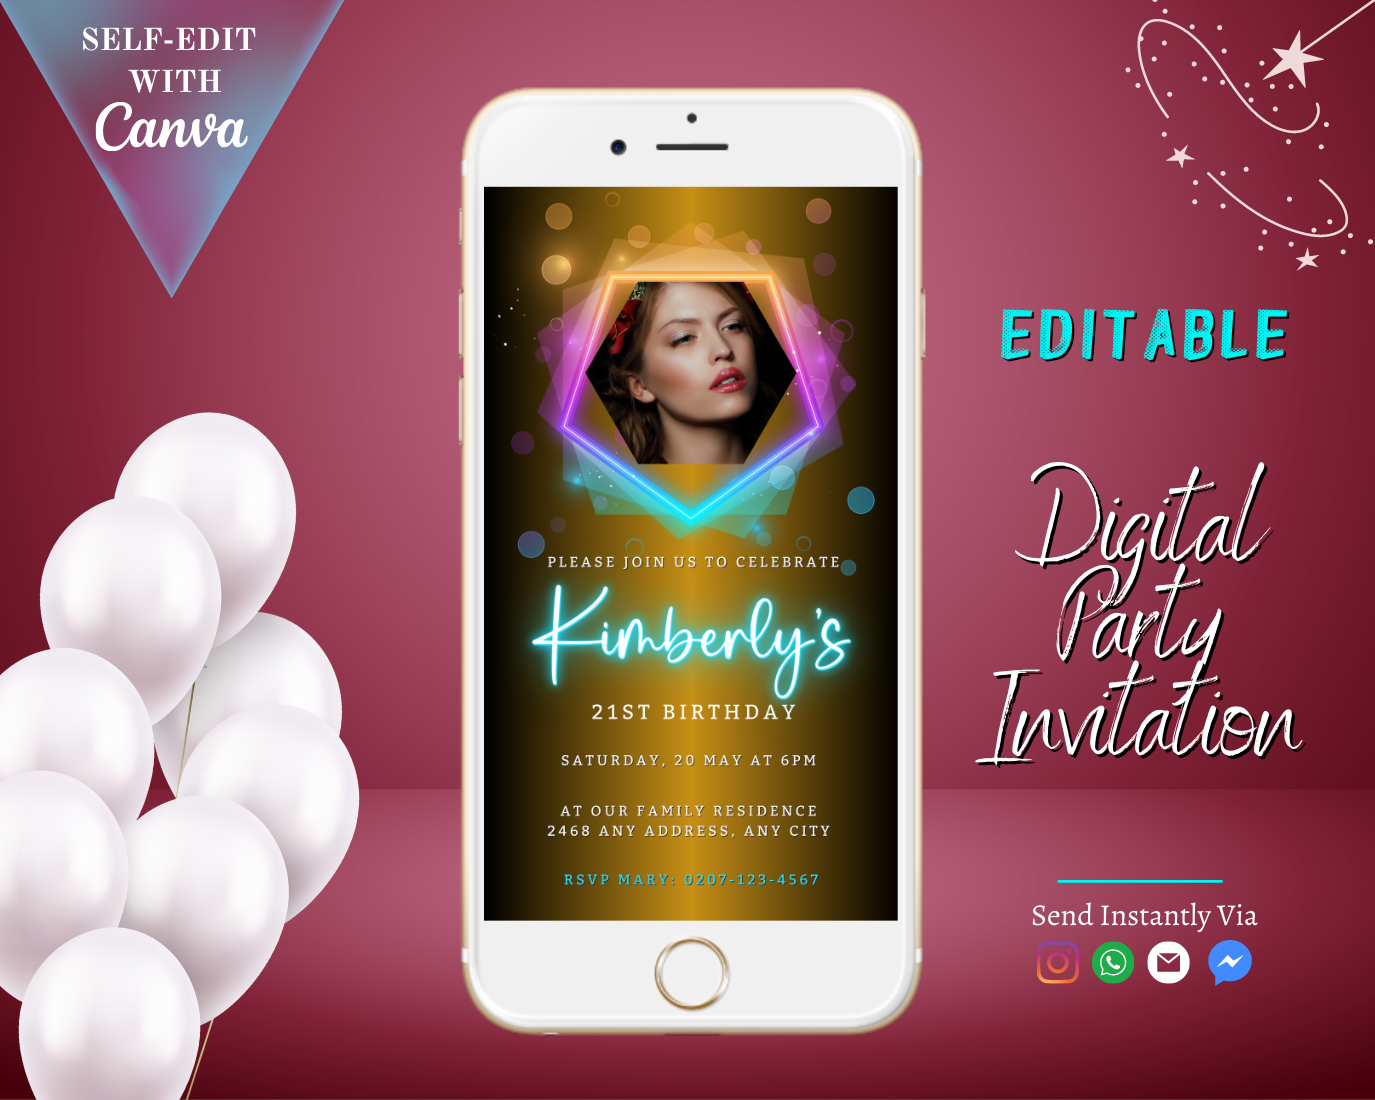 White smartphone displaying a customizable digital birthday party evite featuring a woman's photo, tailored for easy personalization and electronic sharing.